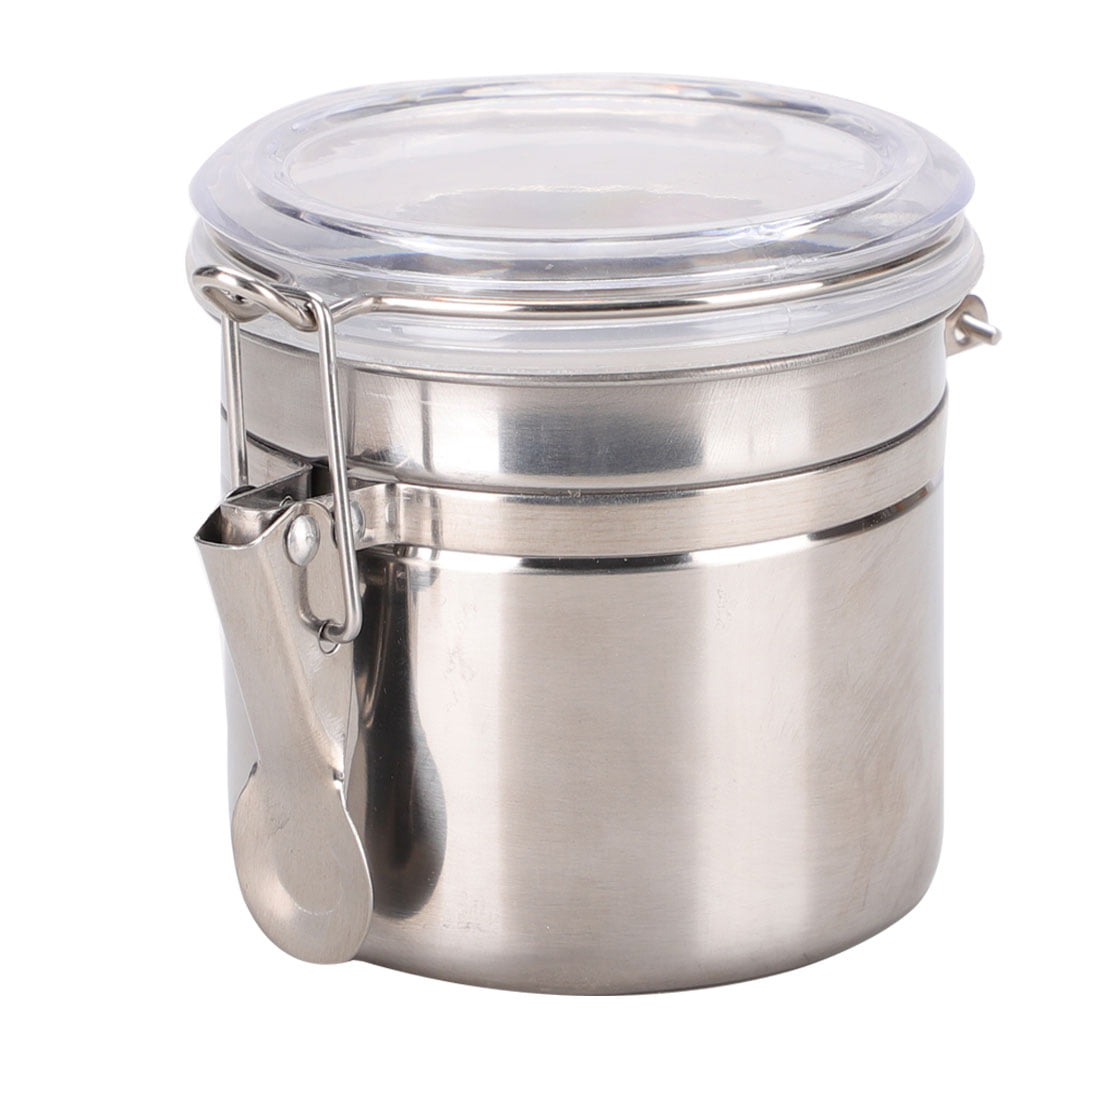 High Grade Container -Puri dabba Stainless Steel Cake Storage Tin Canister 